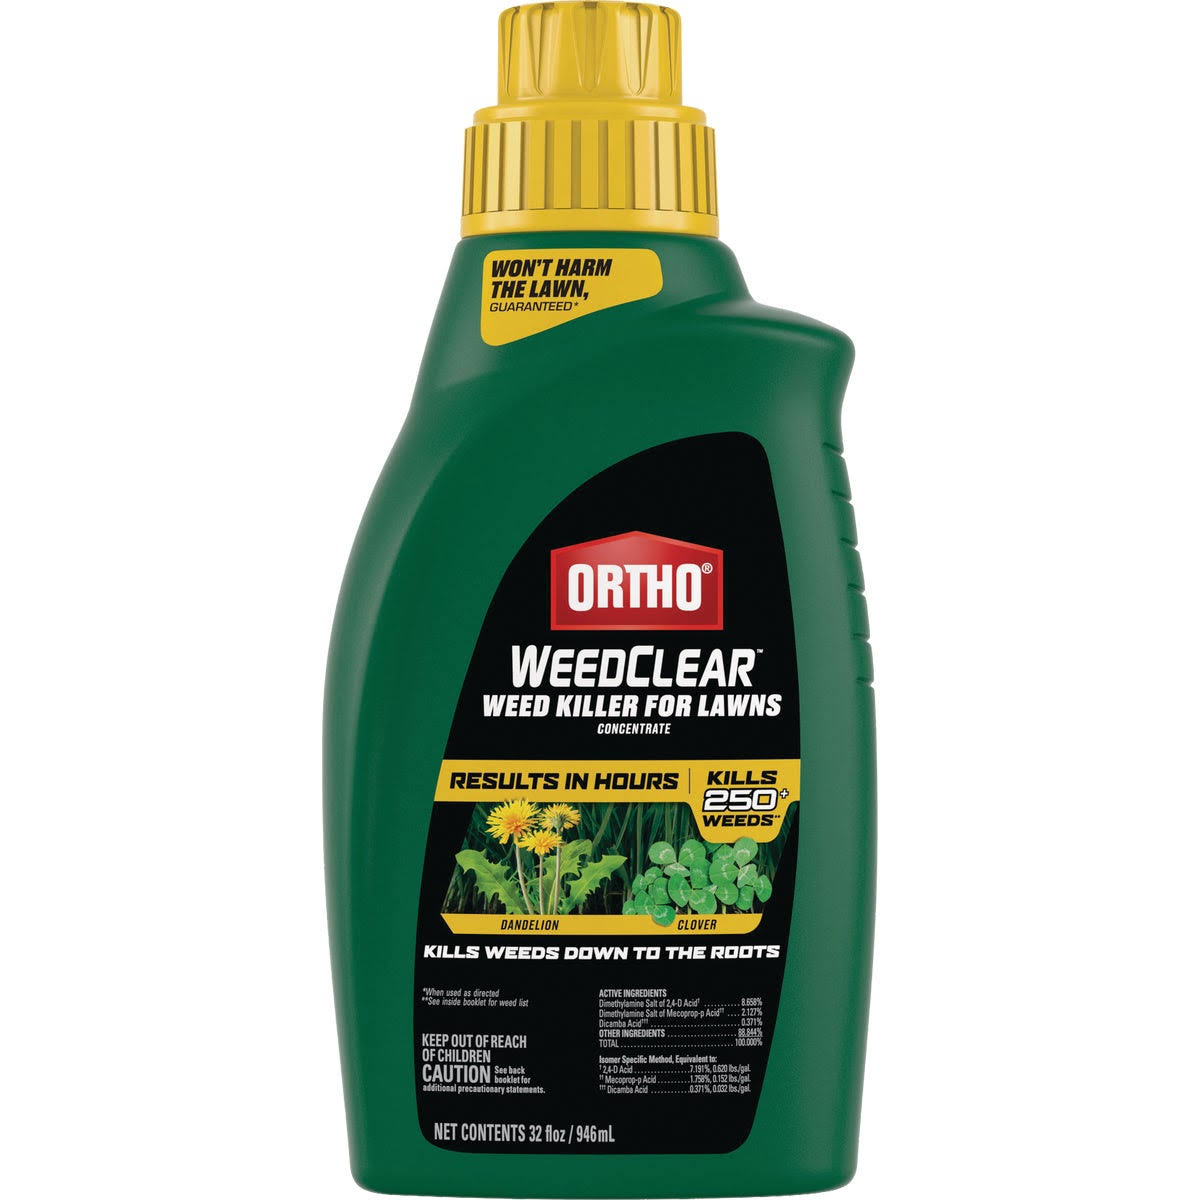 Ortho WeedClear 32 Oz. Concentrate Lawn Weed Killer 0204710